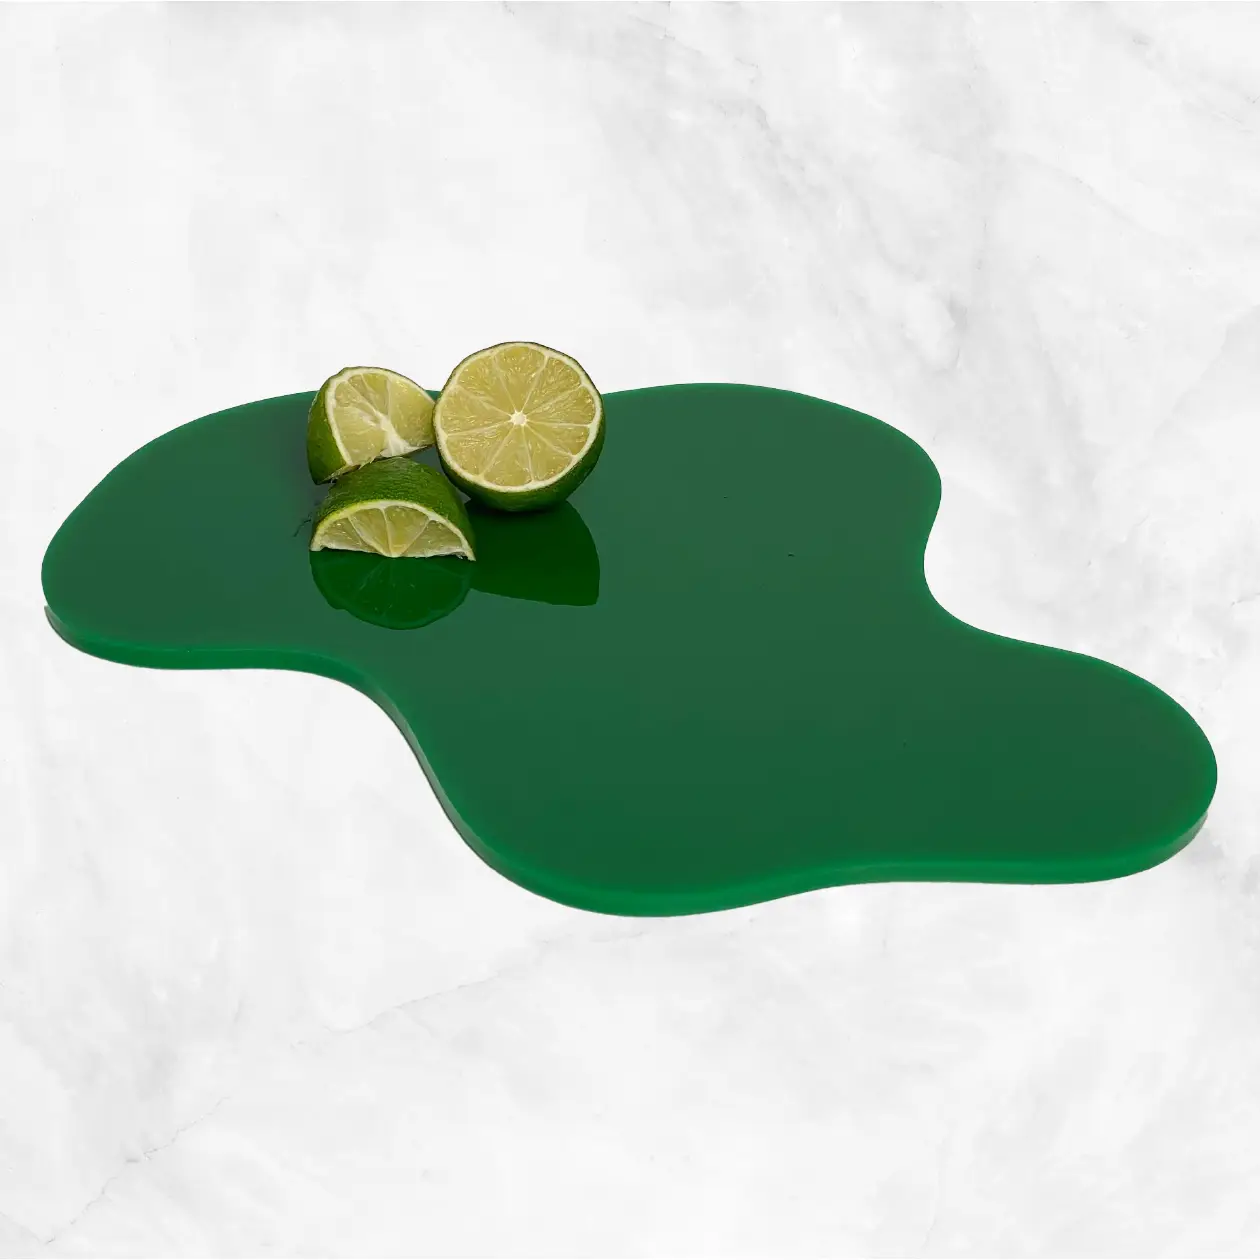 Medium Table Blob - Green Delivery